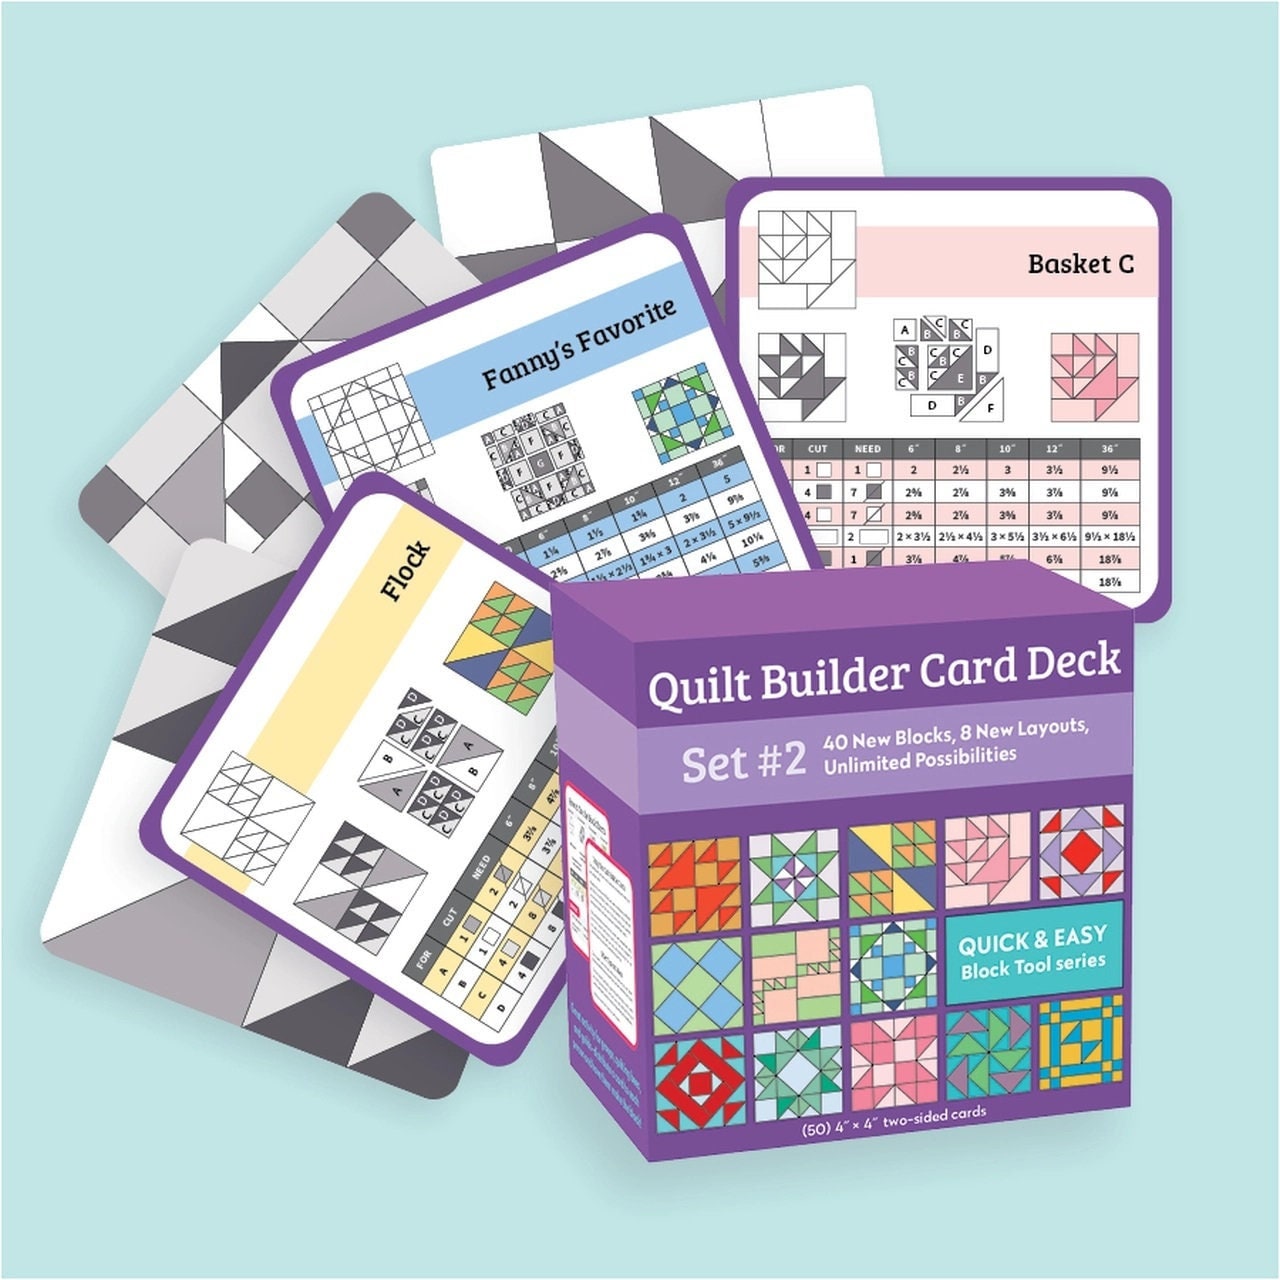 Quilt Builder Card Deck #2 Boxed Set of Quilt Block Patterns with cutting instructions